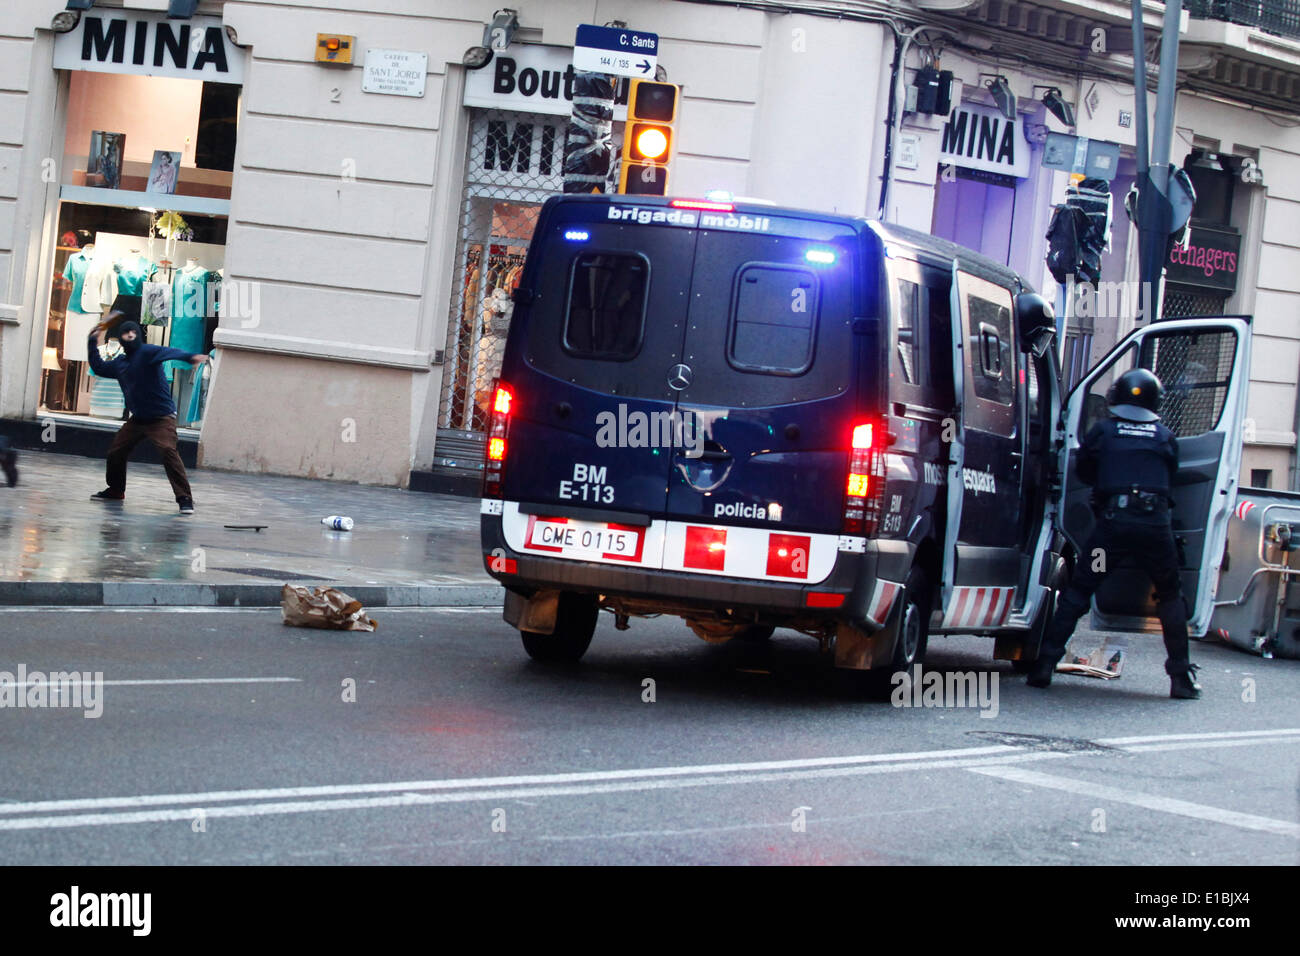 Barcelona, Spain. 26th May, 2014. A protester throws a bottle to a riot police van during the protest against the eviction of 'Can Vies' in Barcelona, Spain, May 26, 2014. Clashed happened between the police and protesters in Barcelona for the eviction of activists from a well-known squat. Police had earlier evicted occupants inside the 'Can Vies', a building owned by the local transport authority but occupied since 1997 by activists who have used it as a community centre. © Pau Barrena/Xinhua/Alamy Live News Stock Photo